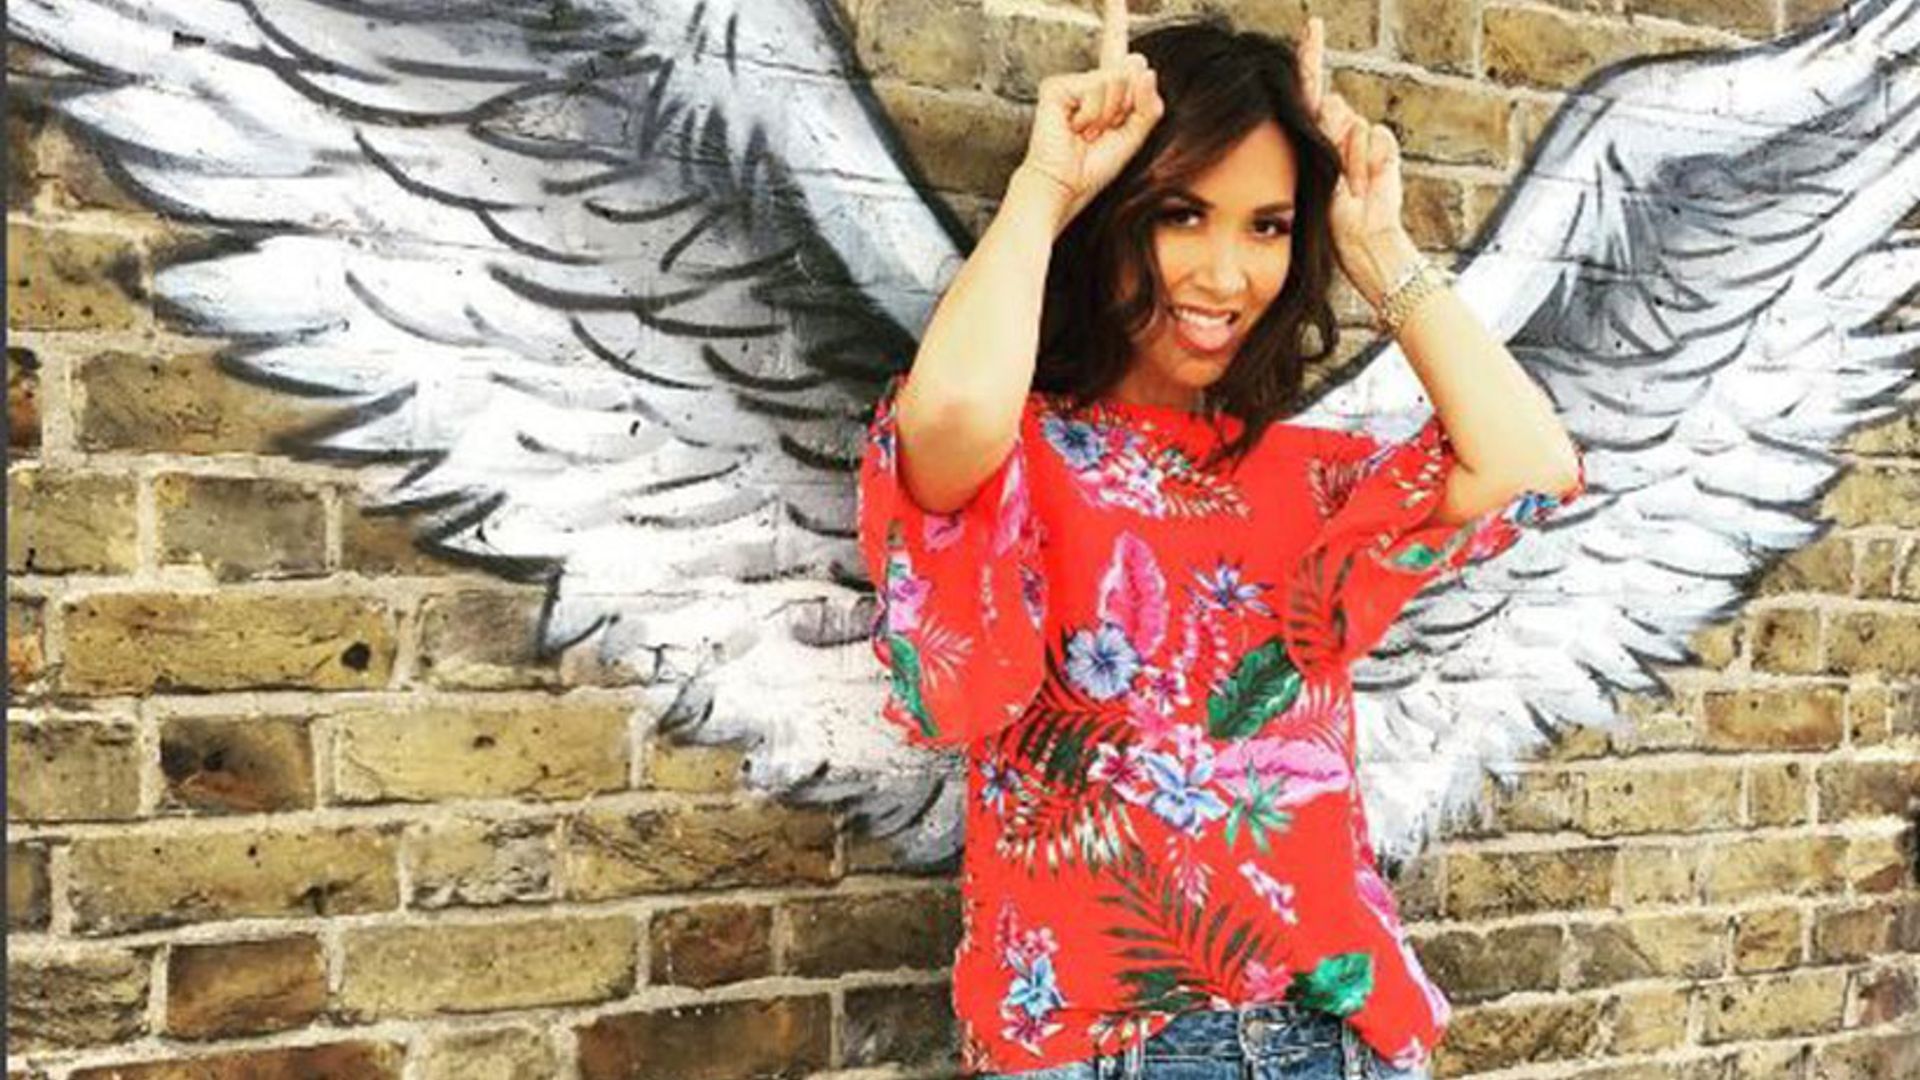 Myleene Klass models £45 tropical print blouse from her latest Littlewoods collection